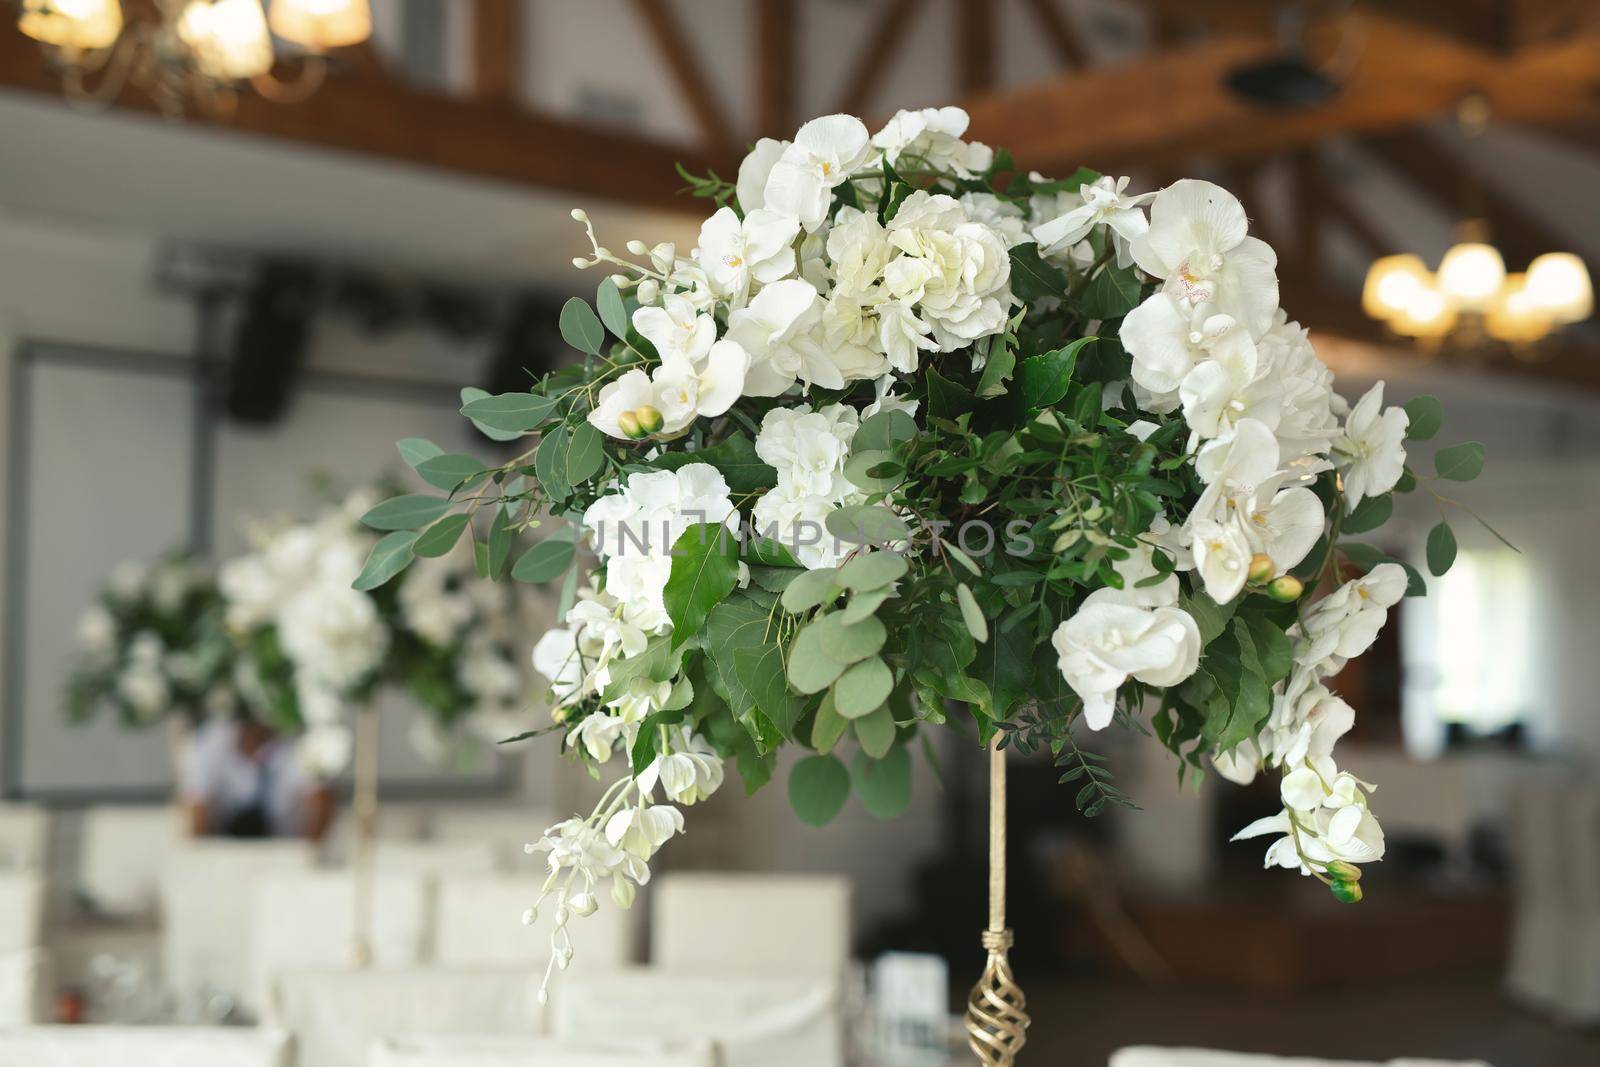 Wedding floral decor in white at a banquet in a restaurant.